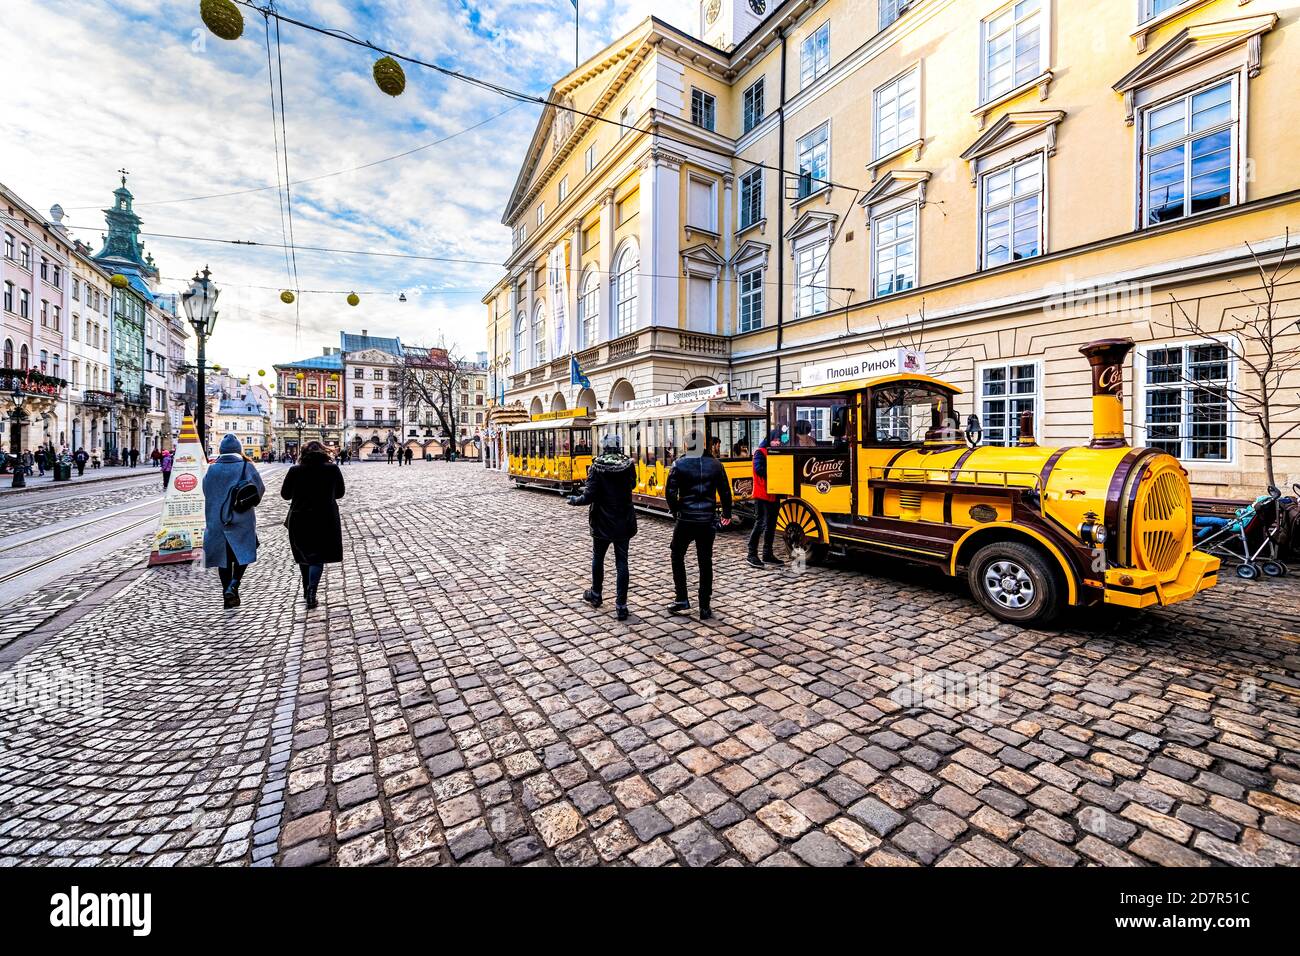 Lviv, Ukraine - January 21, 2020: Ukrainian Lvov city in old town with people on Svitoch sponsored guided tram tramway car tour at rynok market square Stock Photo